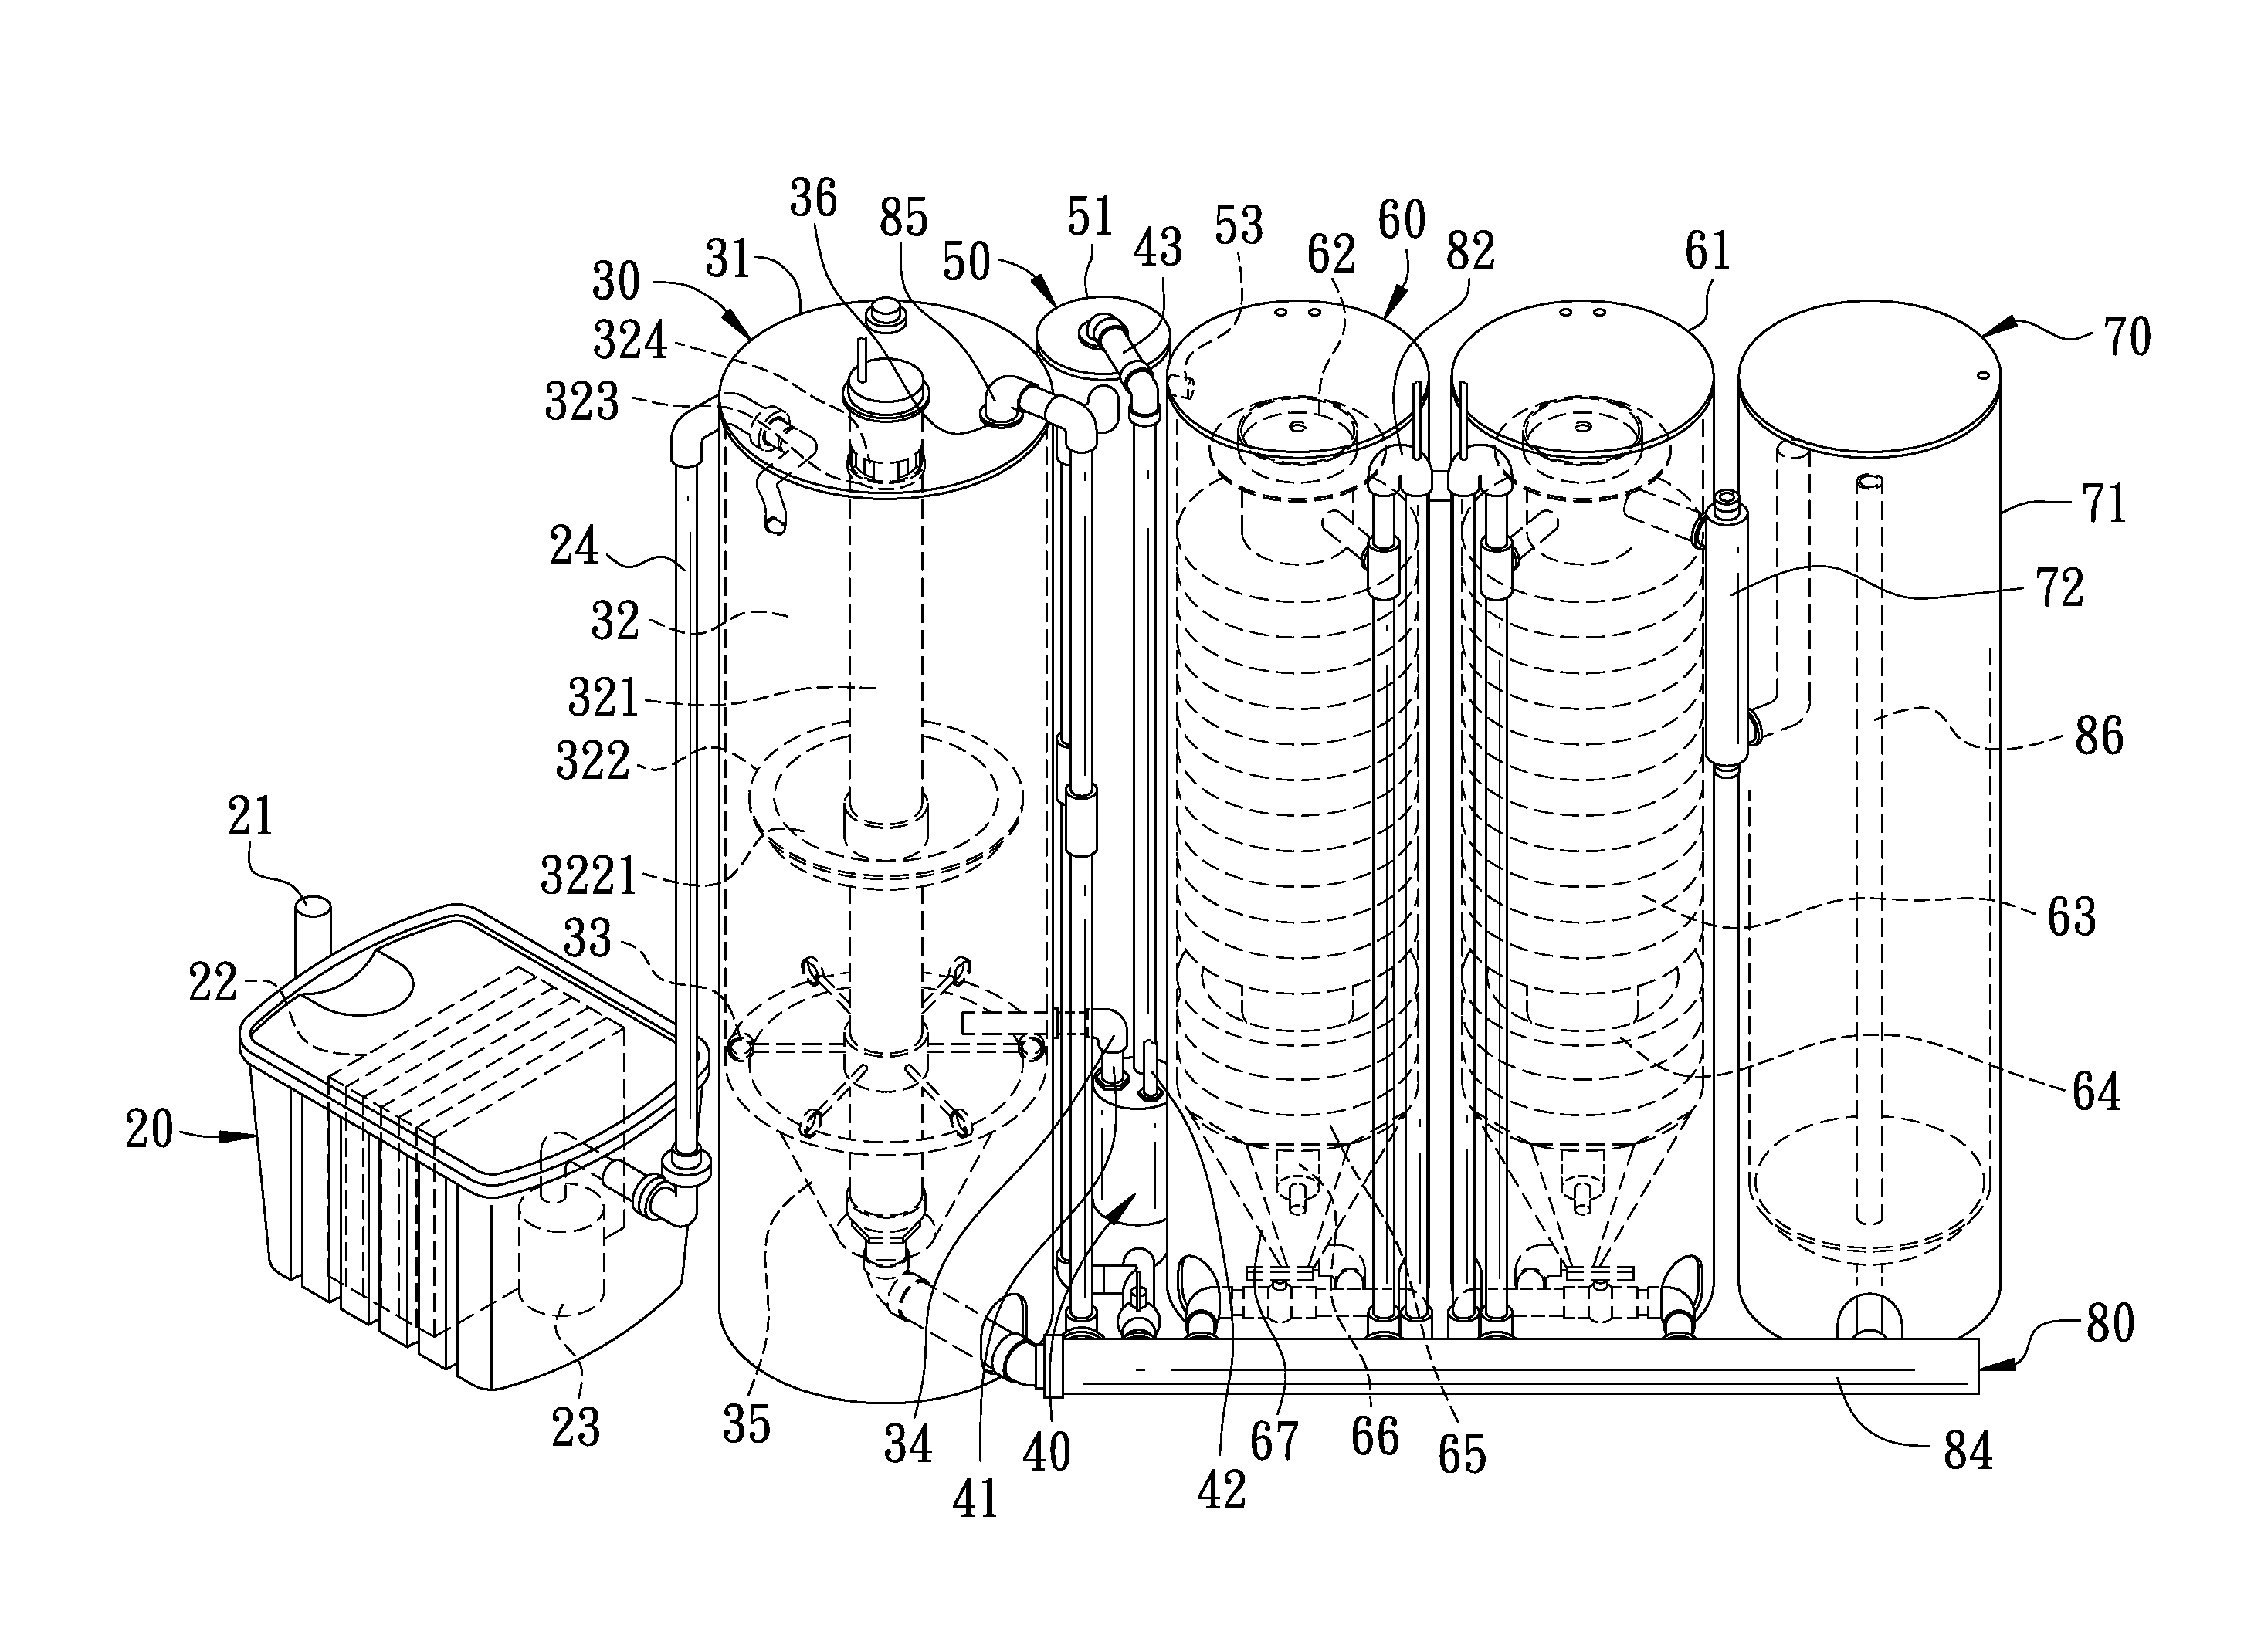 Waste water treatment apparatus